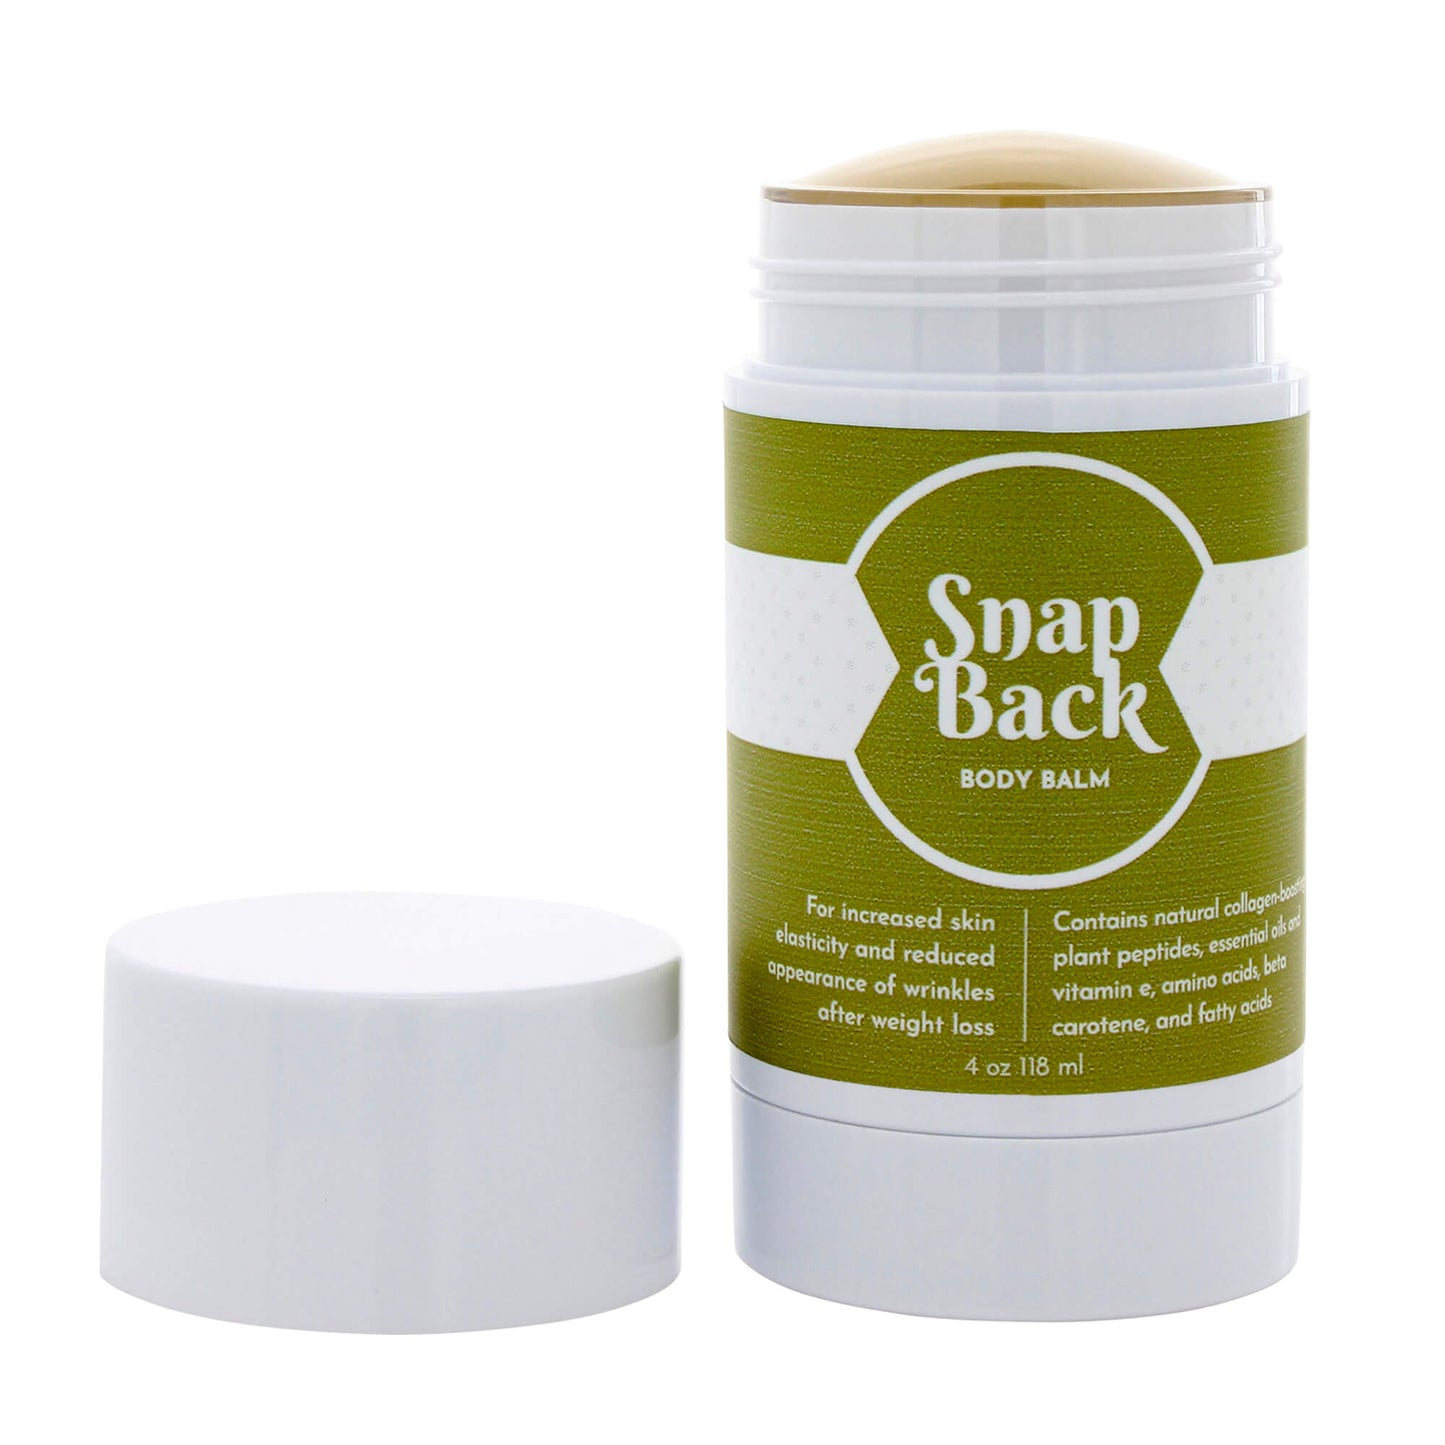 Front image of snap back body balm with the lid off and top of product showing